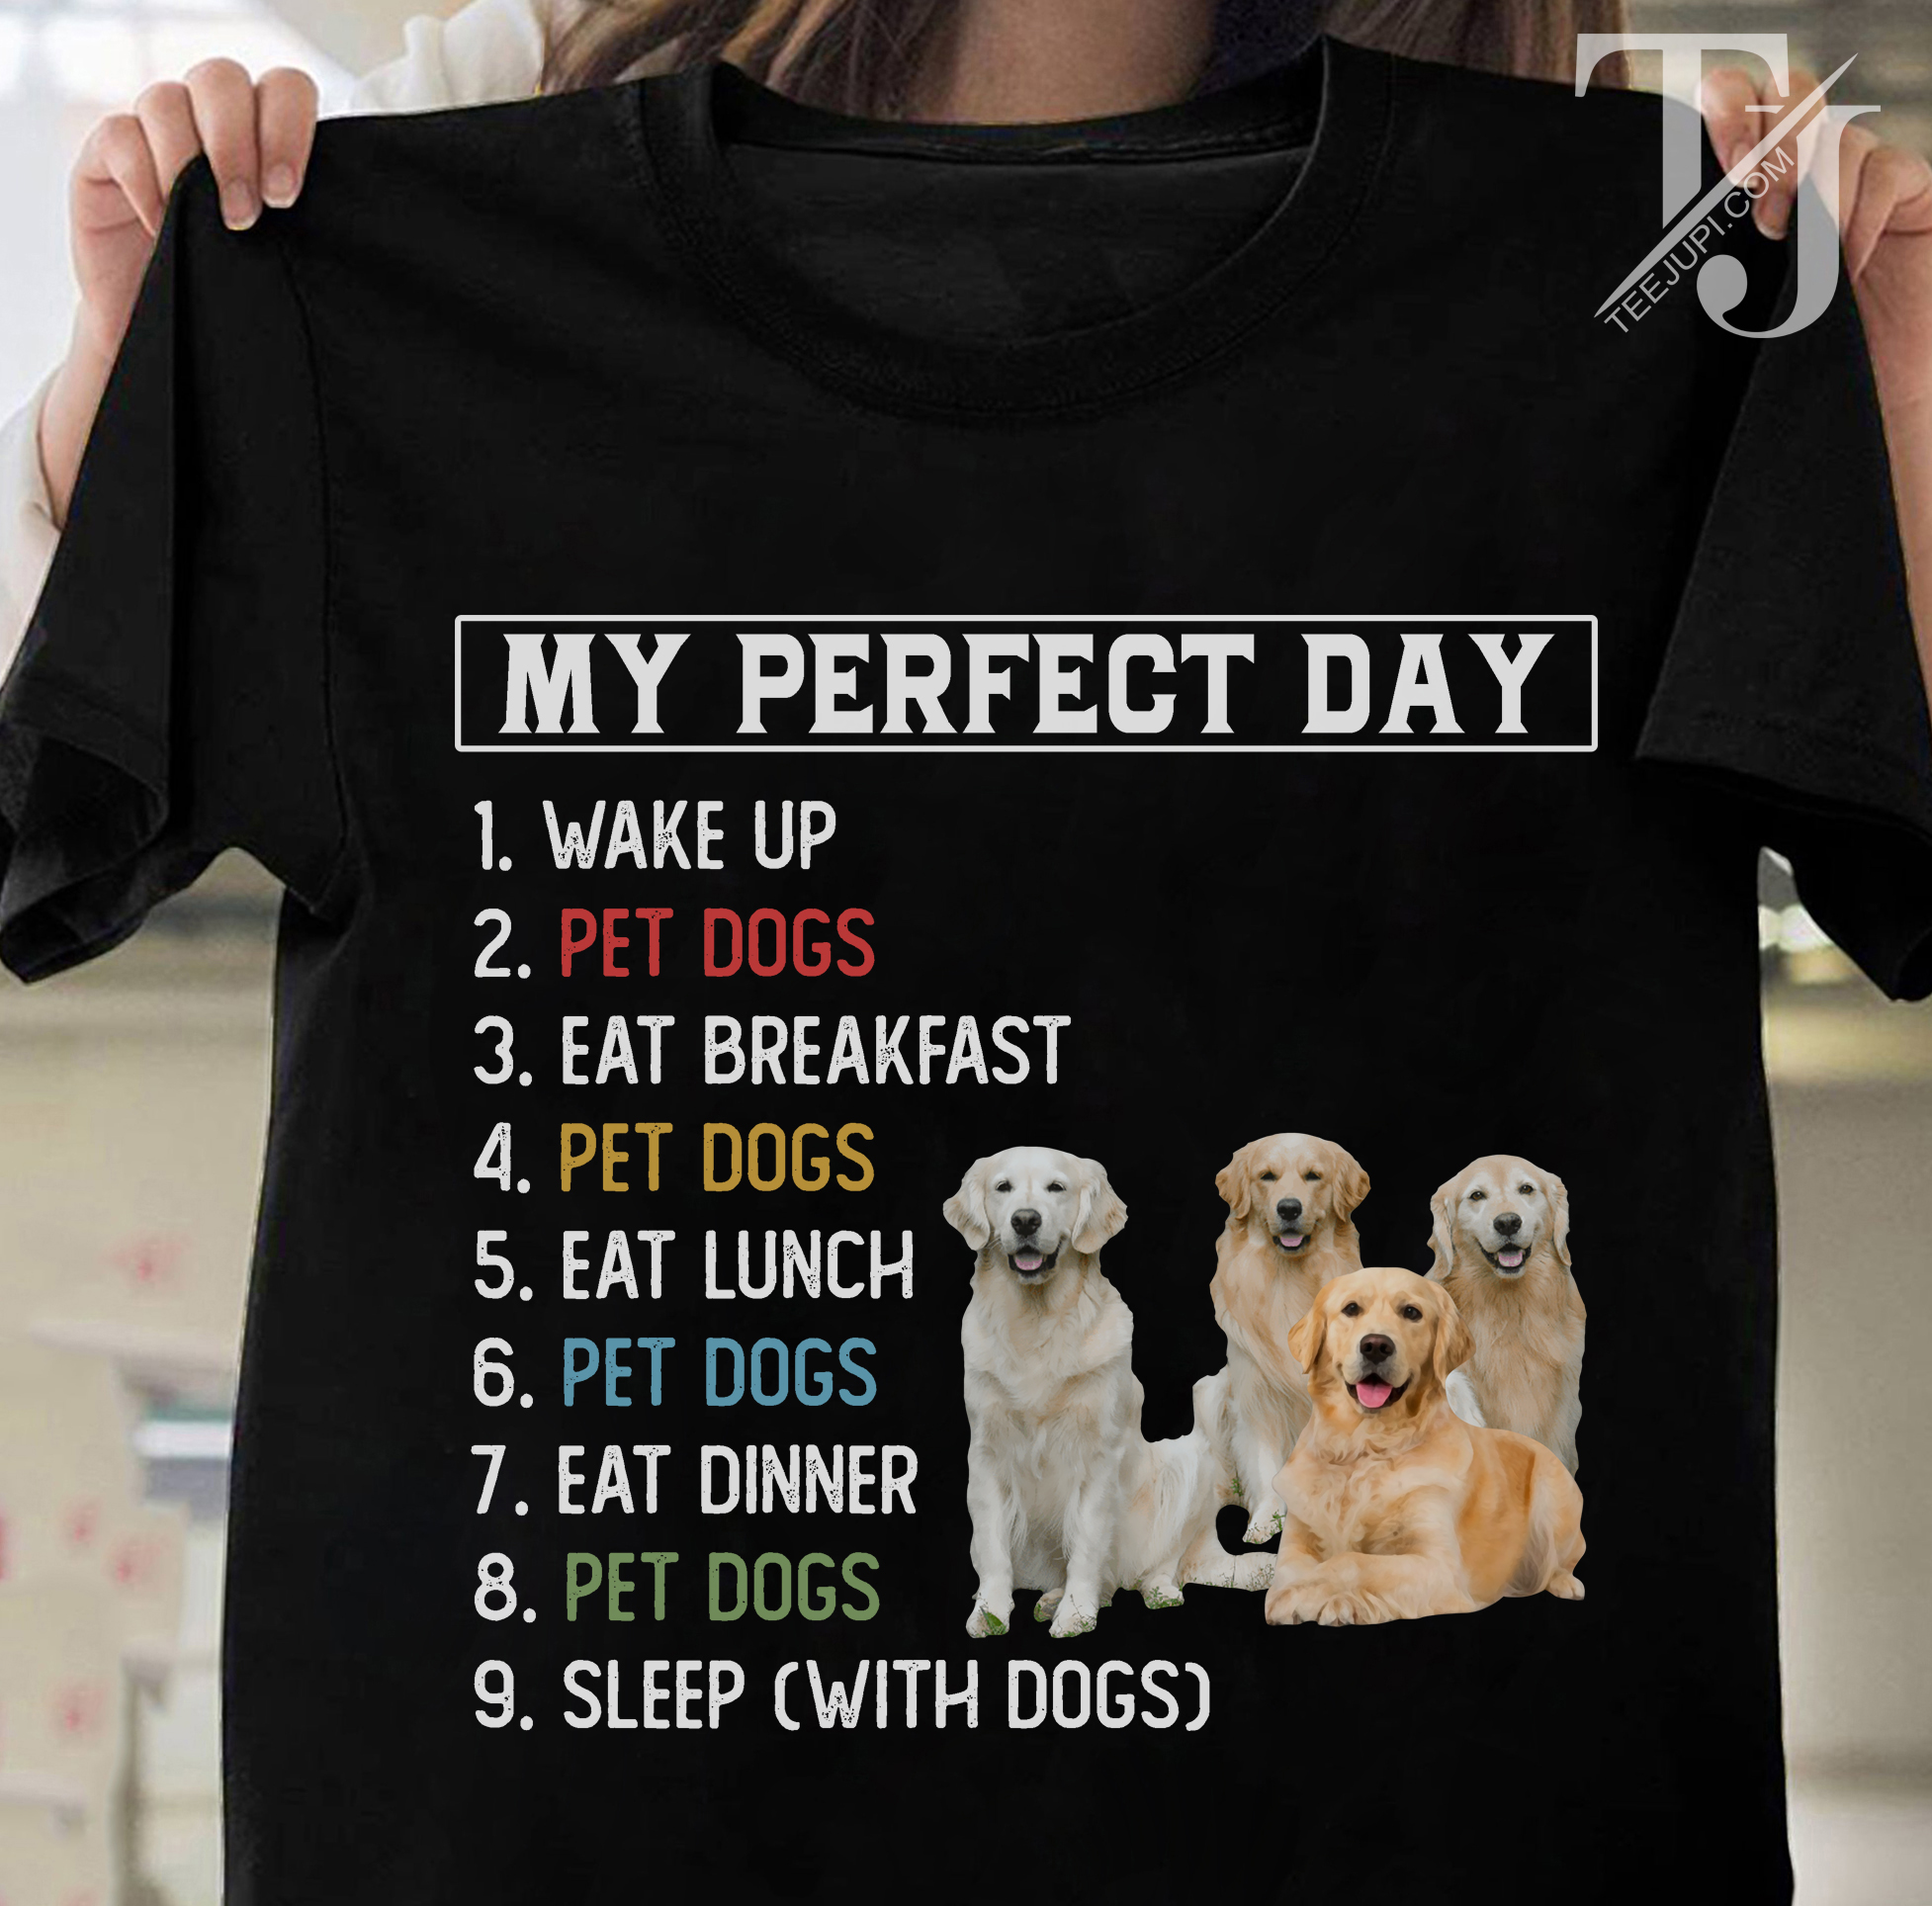 My perfect day - Wake up, pet dogs, eat breakfast, pet dogs, eat lunch, pet dog, eat dinner, pet dogs, sleep